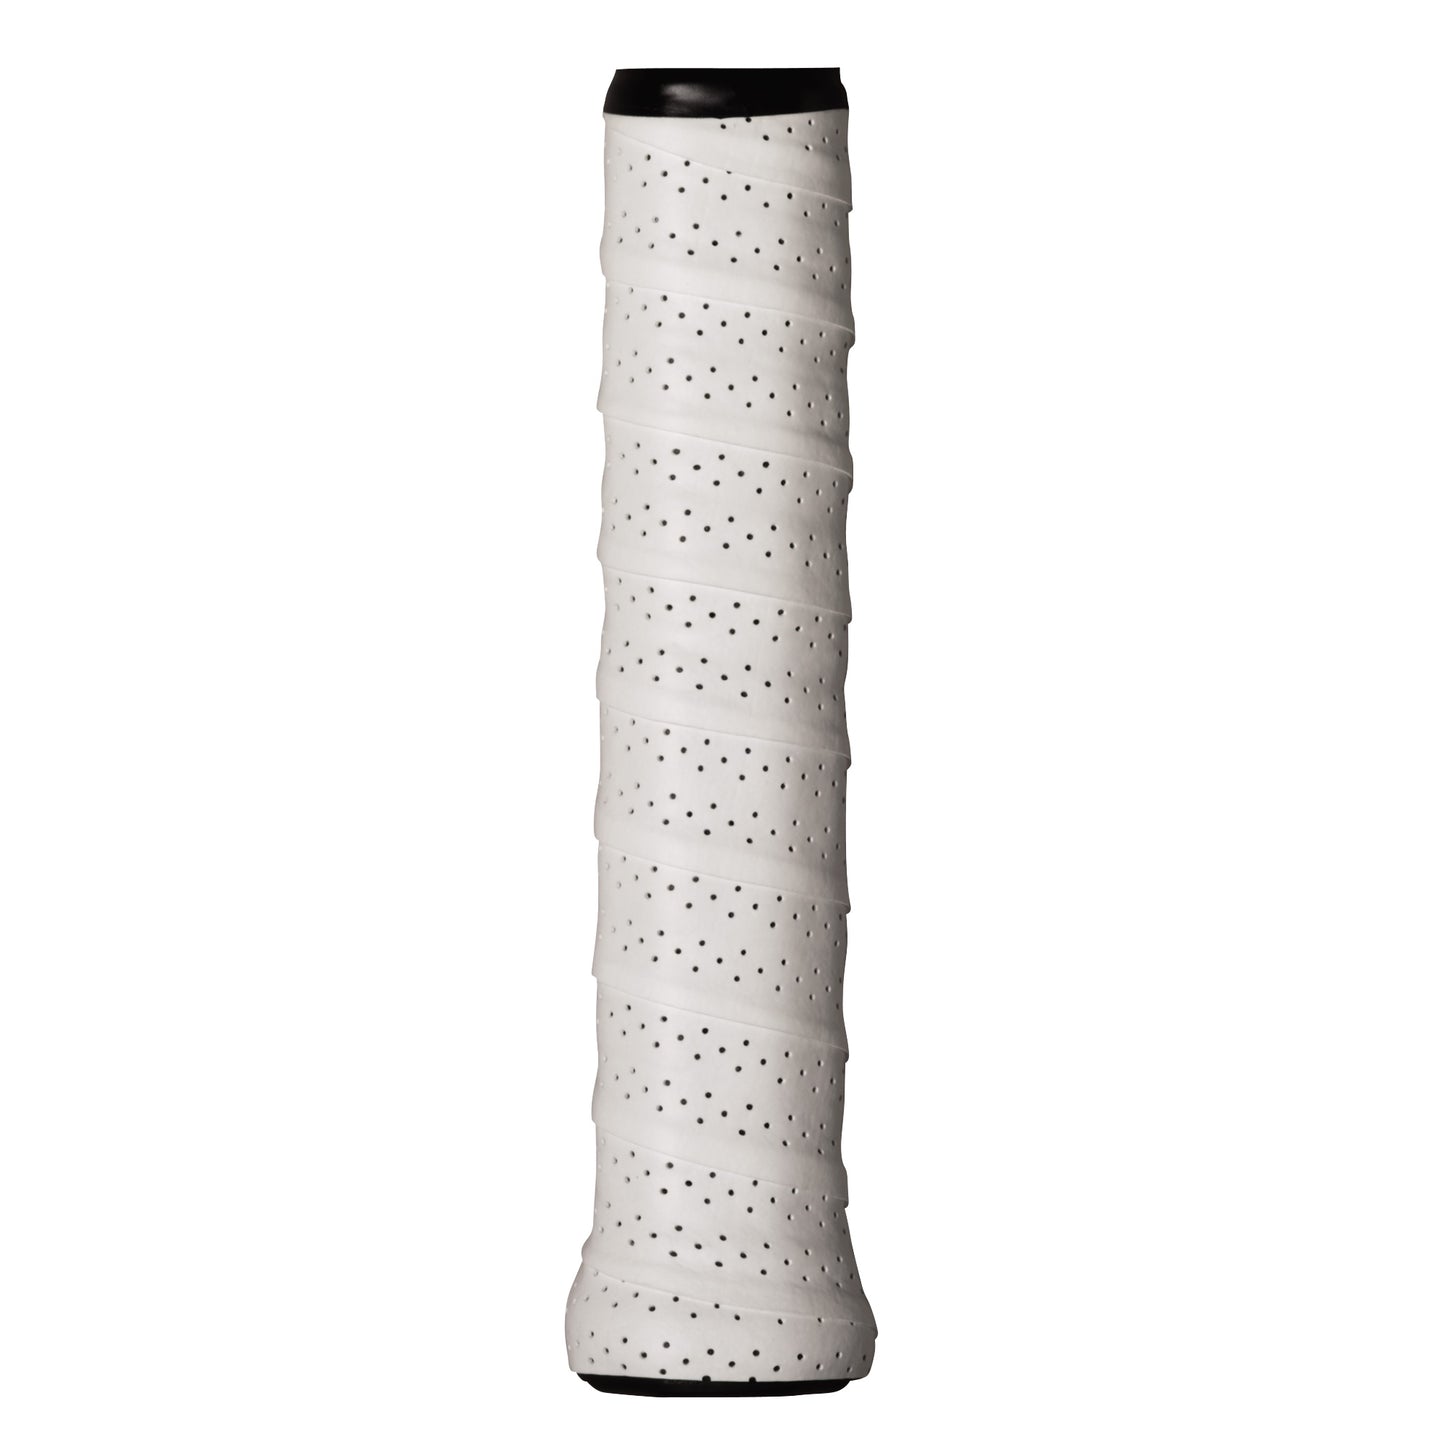 Wilson Pro Perforated 12-pack overgrip